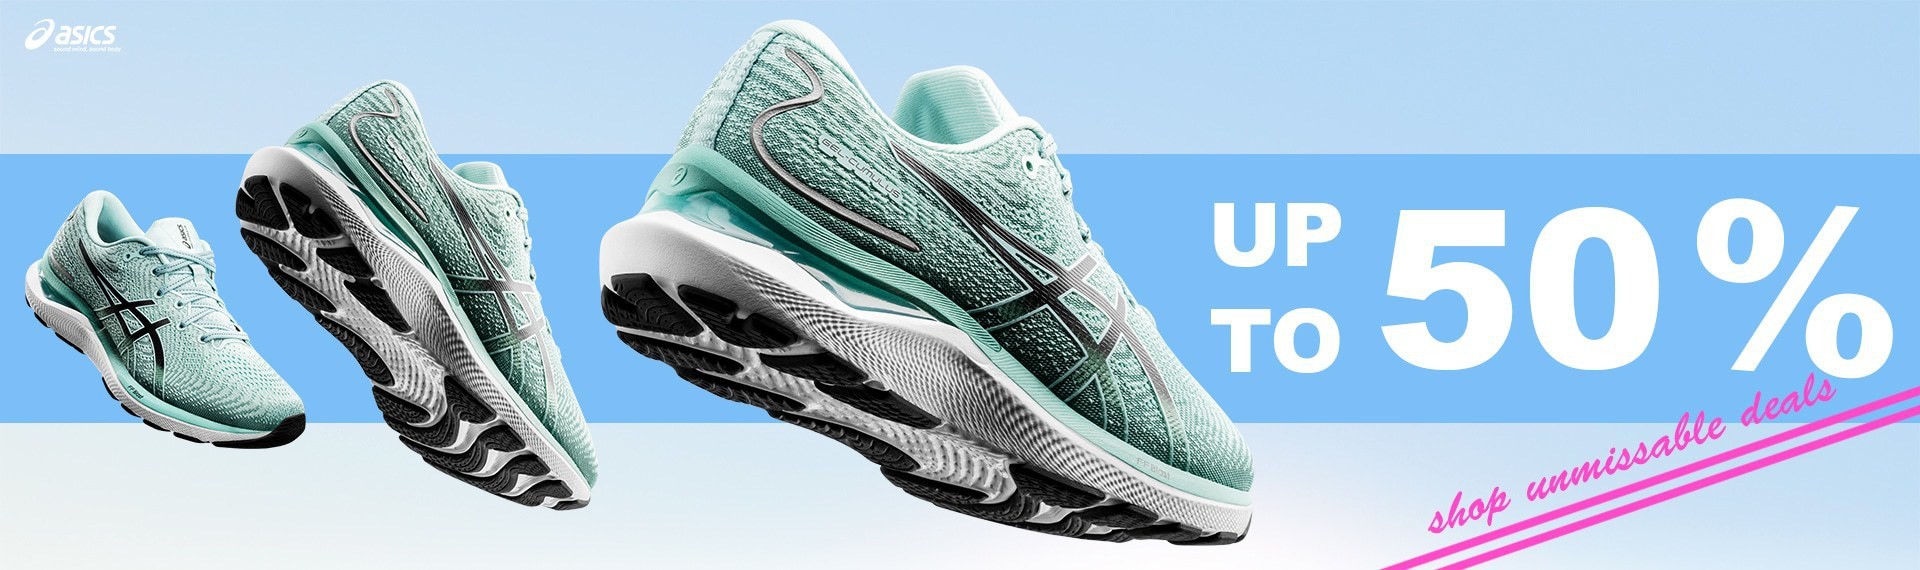 RUNNING SHOES UP TO 50%